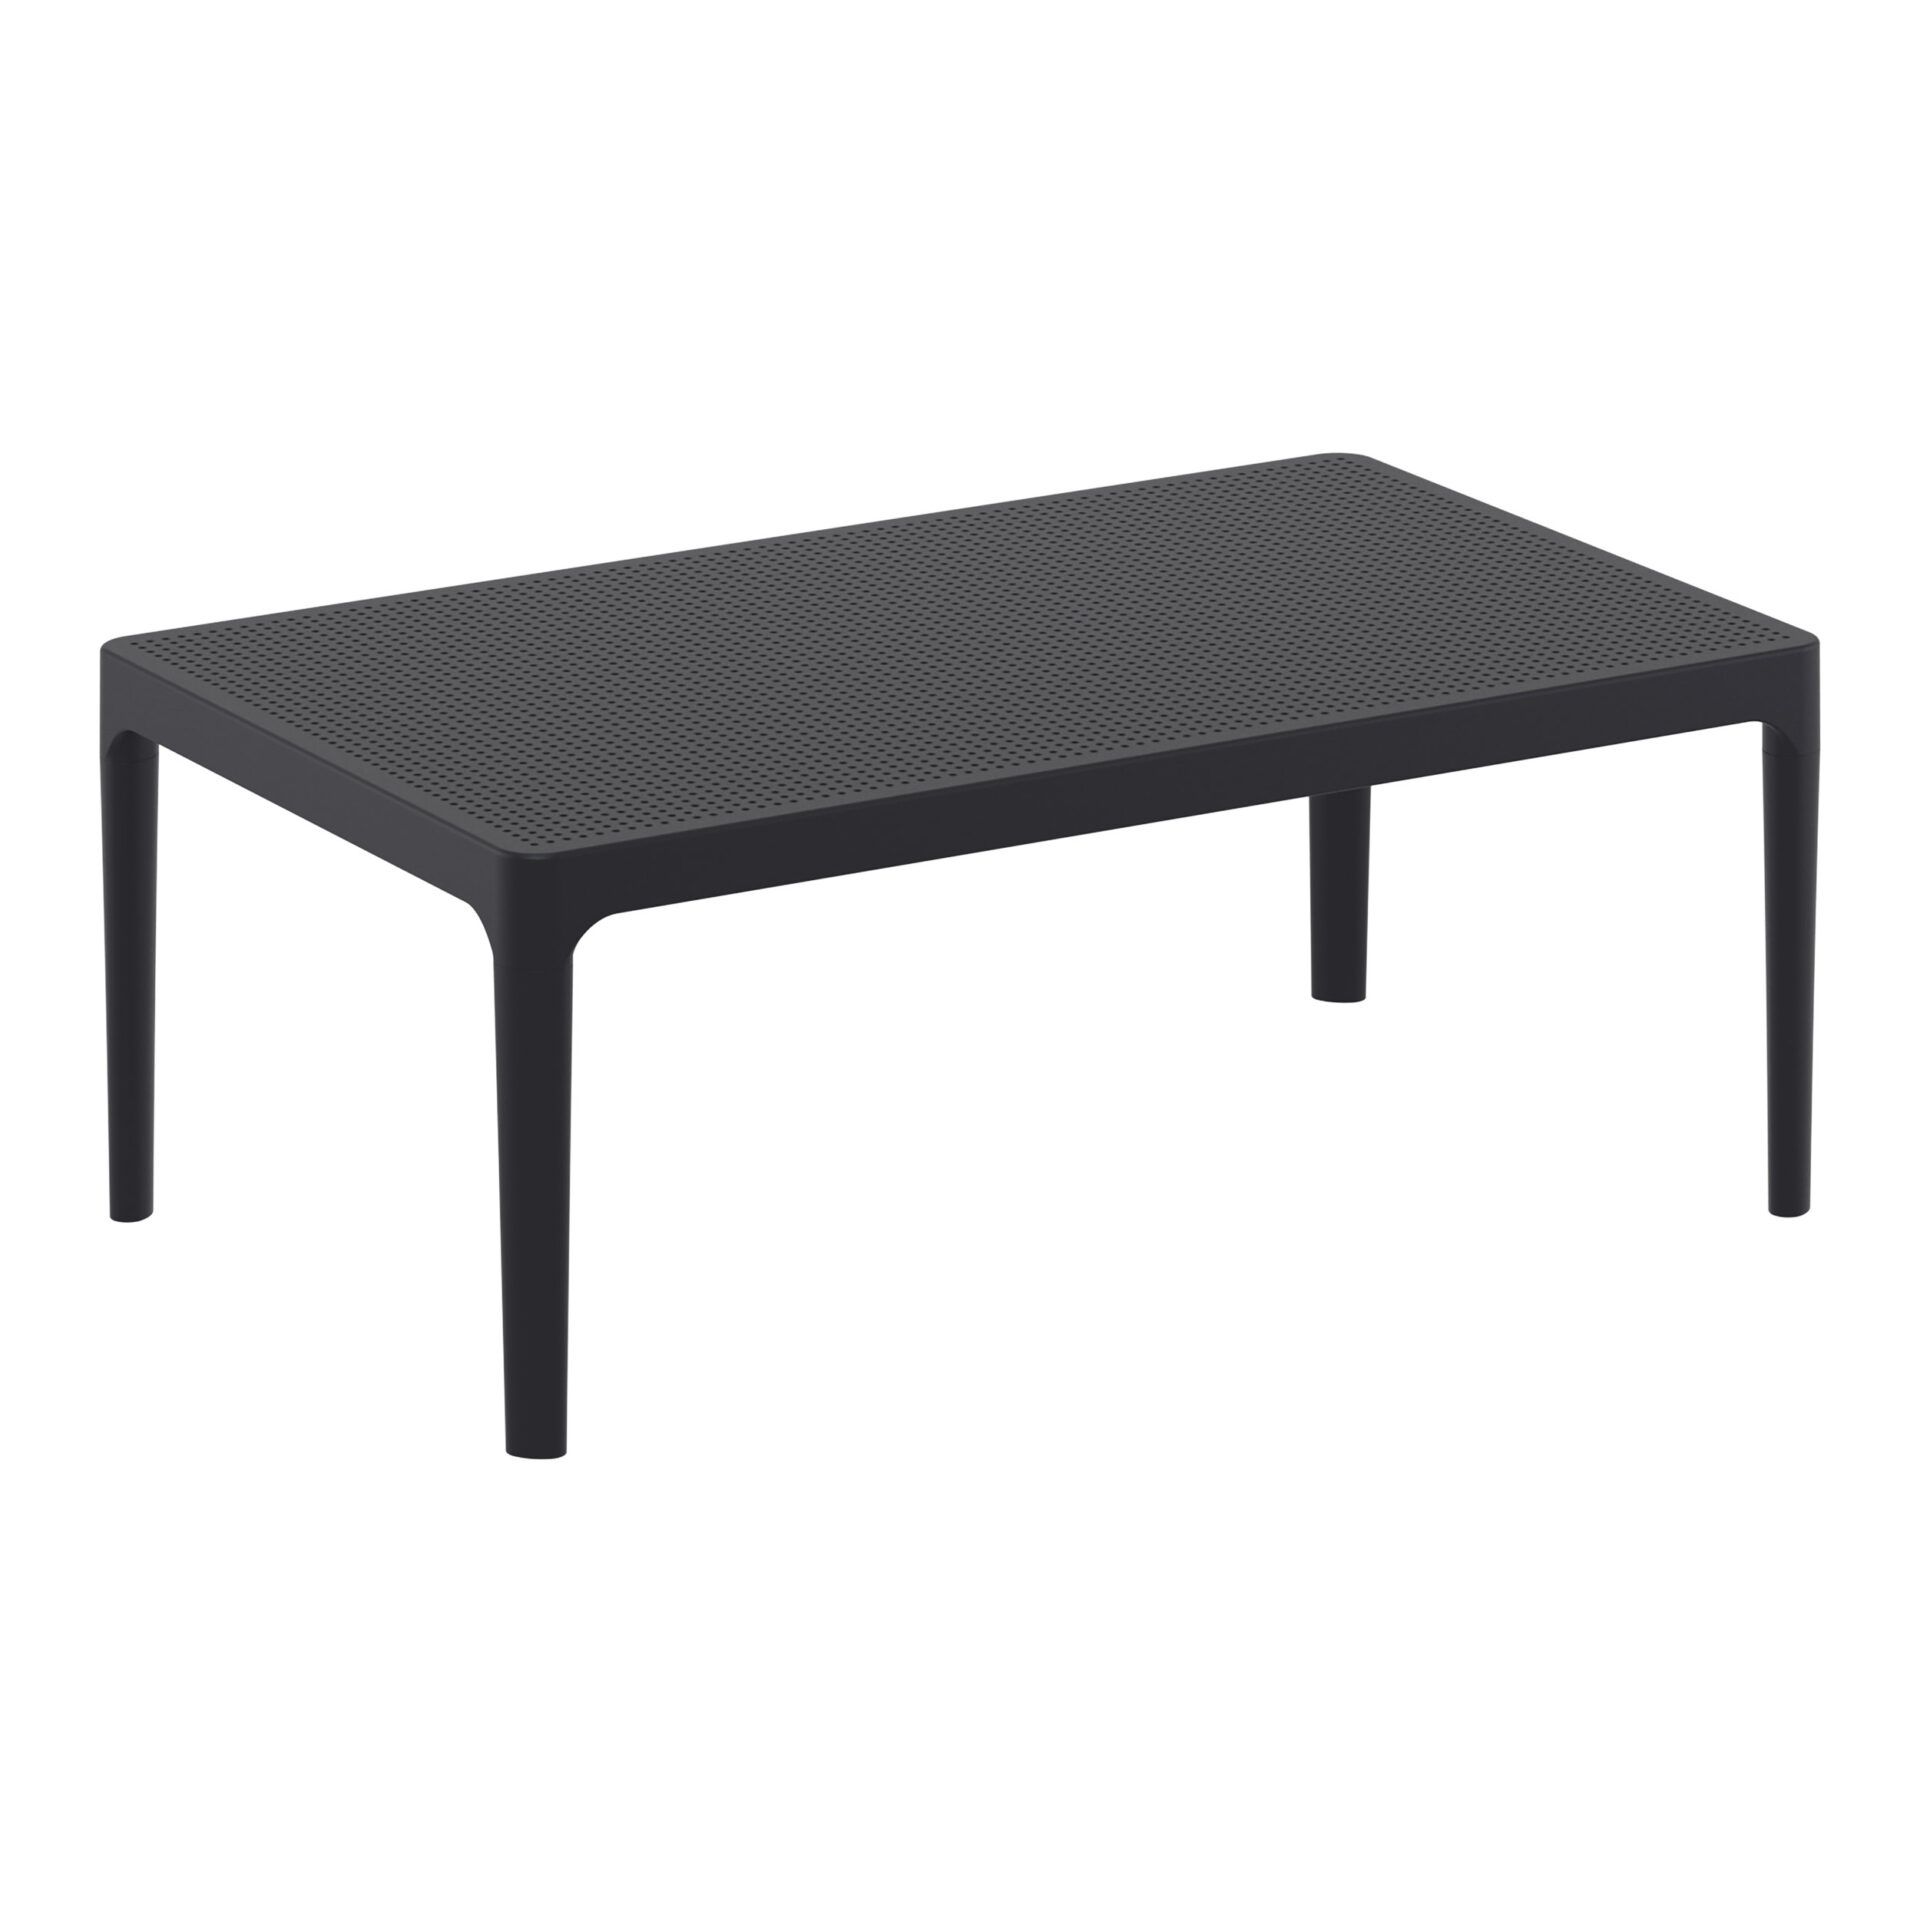 polypropylene-outdoor-sky-lounge-coffee-table-black-front-side